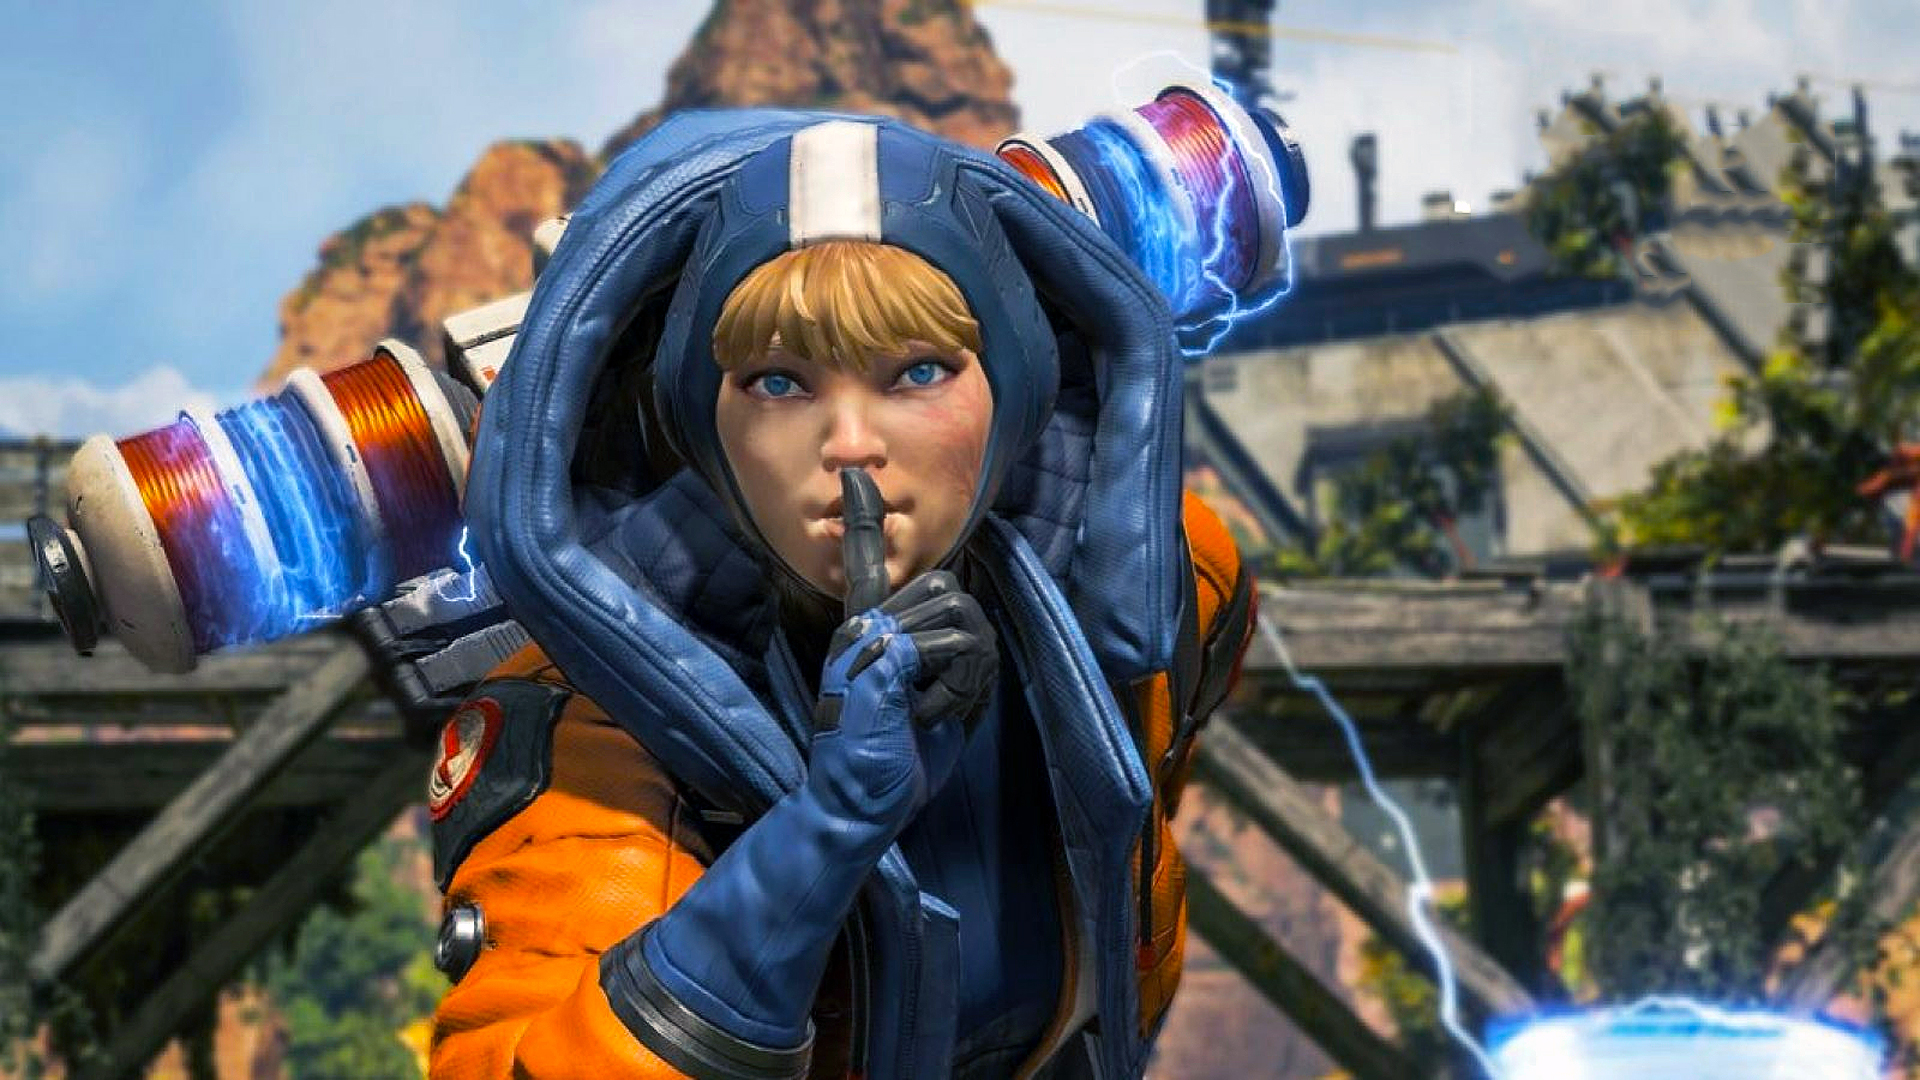 Check Out The Apex Legends Ranked Rewards For Series 1